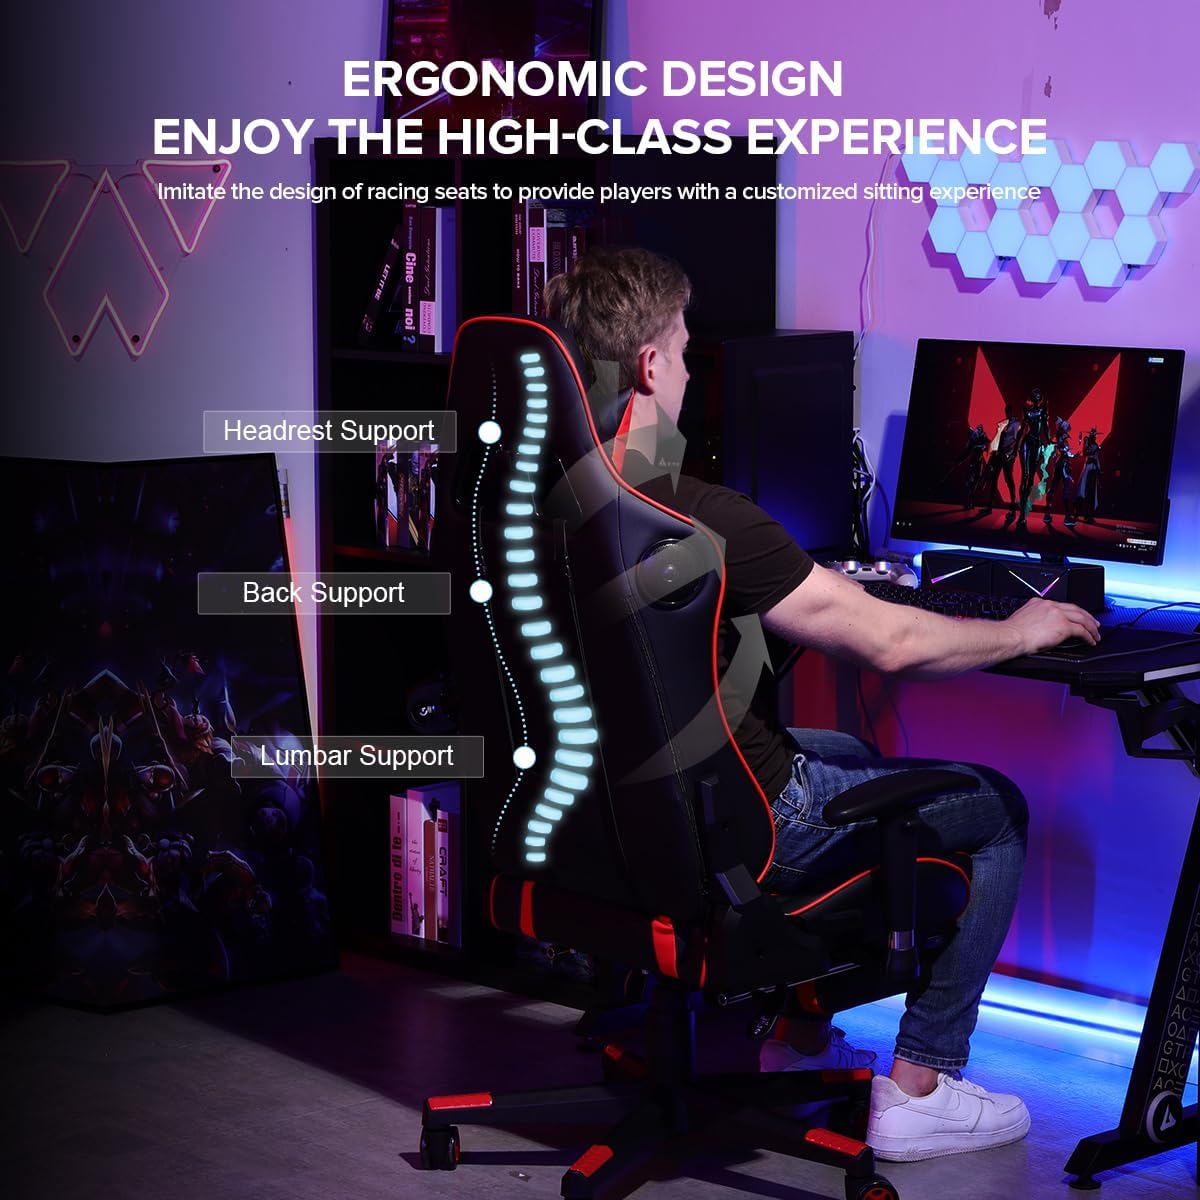 Get ready to experience gaming like never before.Get ready to experience gaming like never before. The GTRACING chair with Bluetooth speakers offers unmatched comfort and sound quality, making every session epic. #GameInStyle
#EpicGamingSessions
#UltimateComfortAndSound